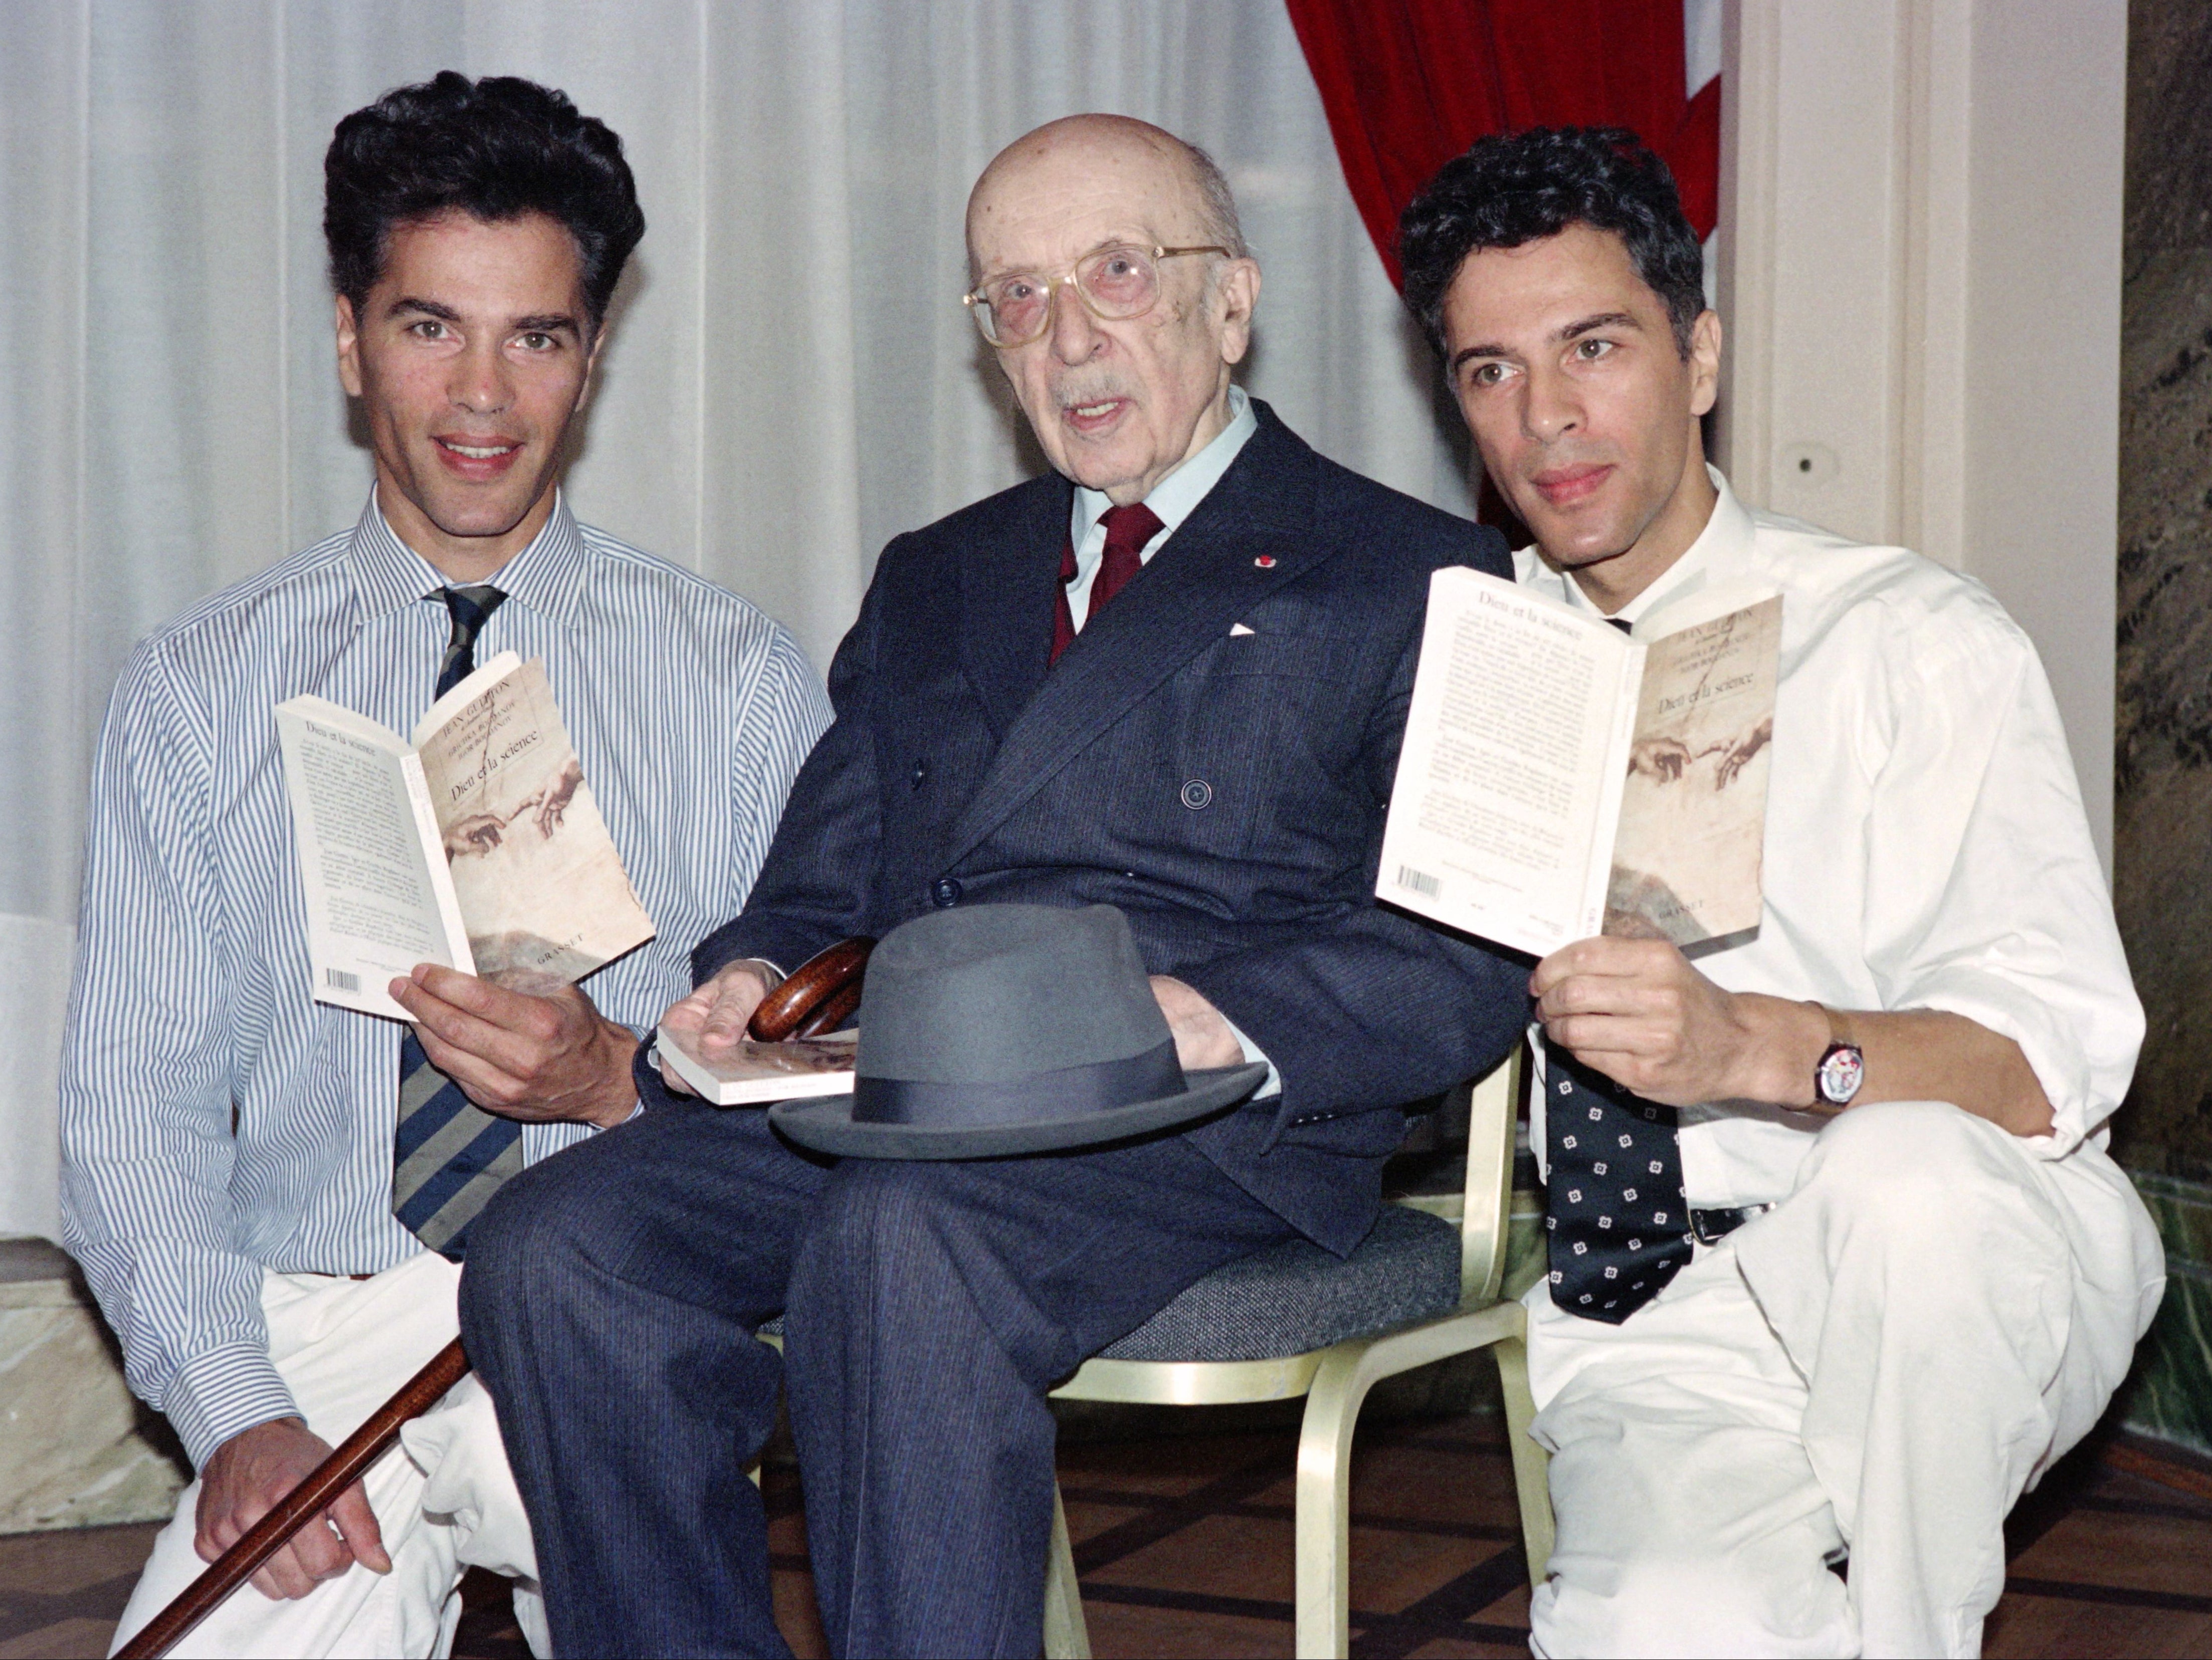 Igor and Grichka Bogdanoff with French writer and philosopher Jean Guitton on 6 September 1991 in Paris, France